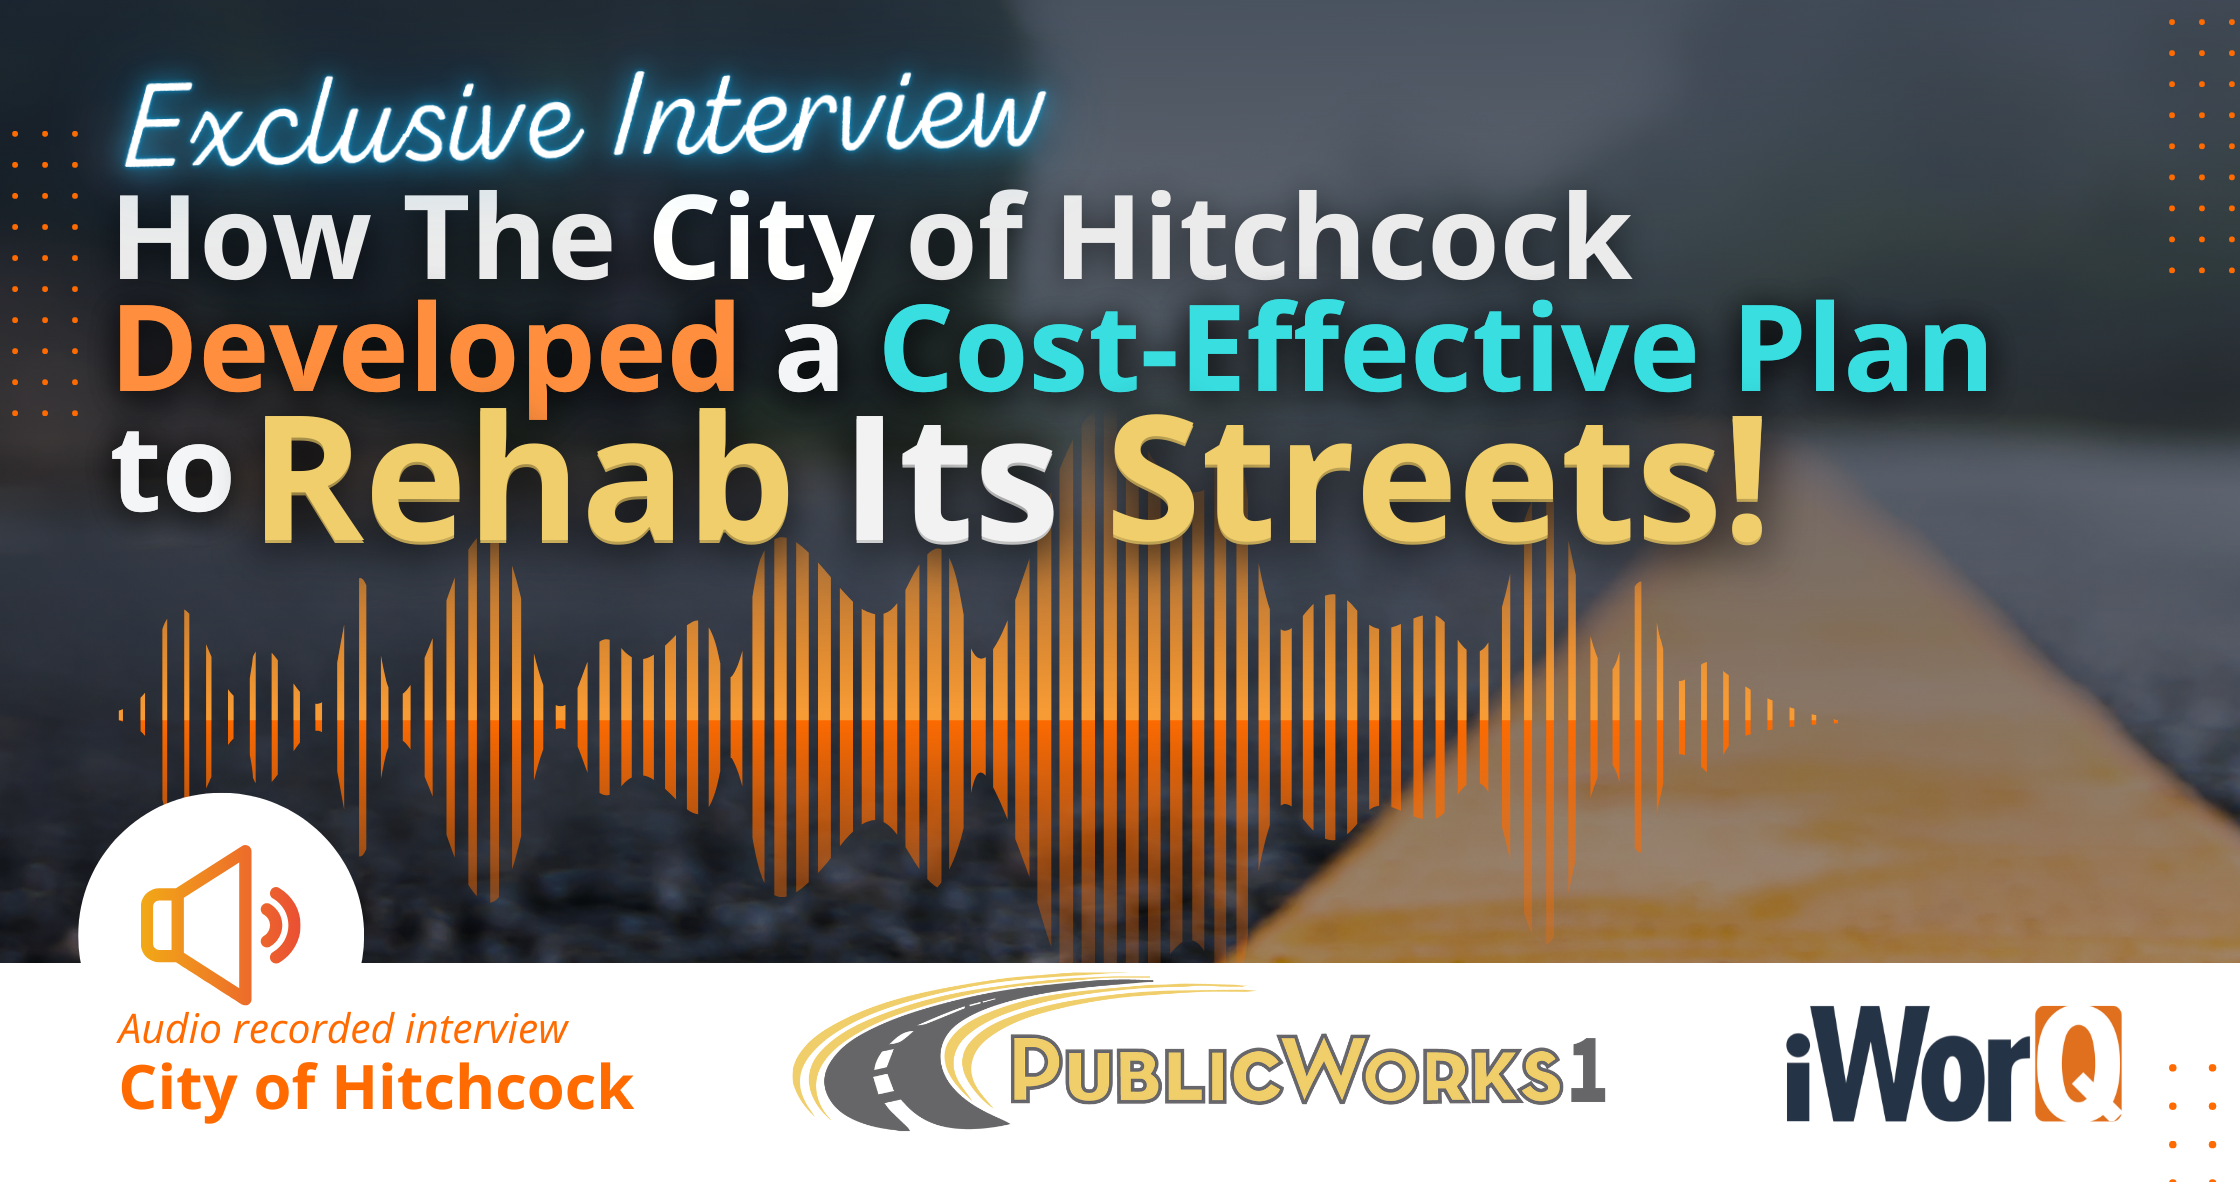 Featured image for “How City of Hitchcock Developed a Cost-Effective Plan to Rehab its Streets.”